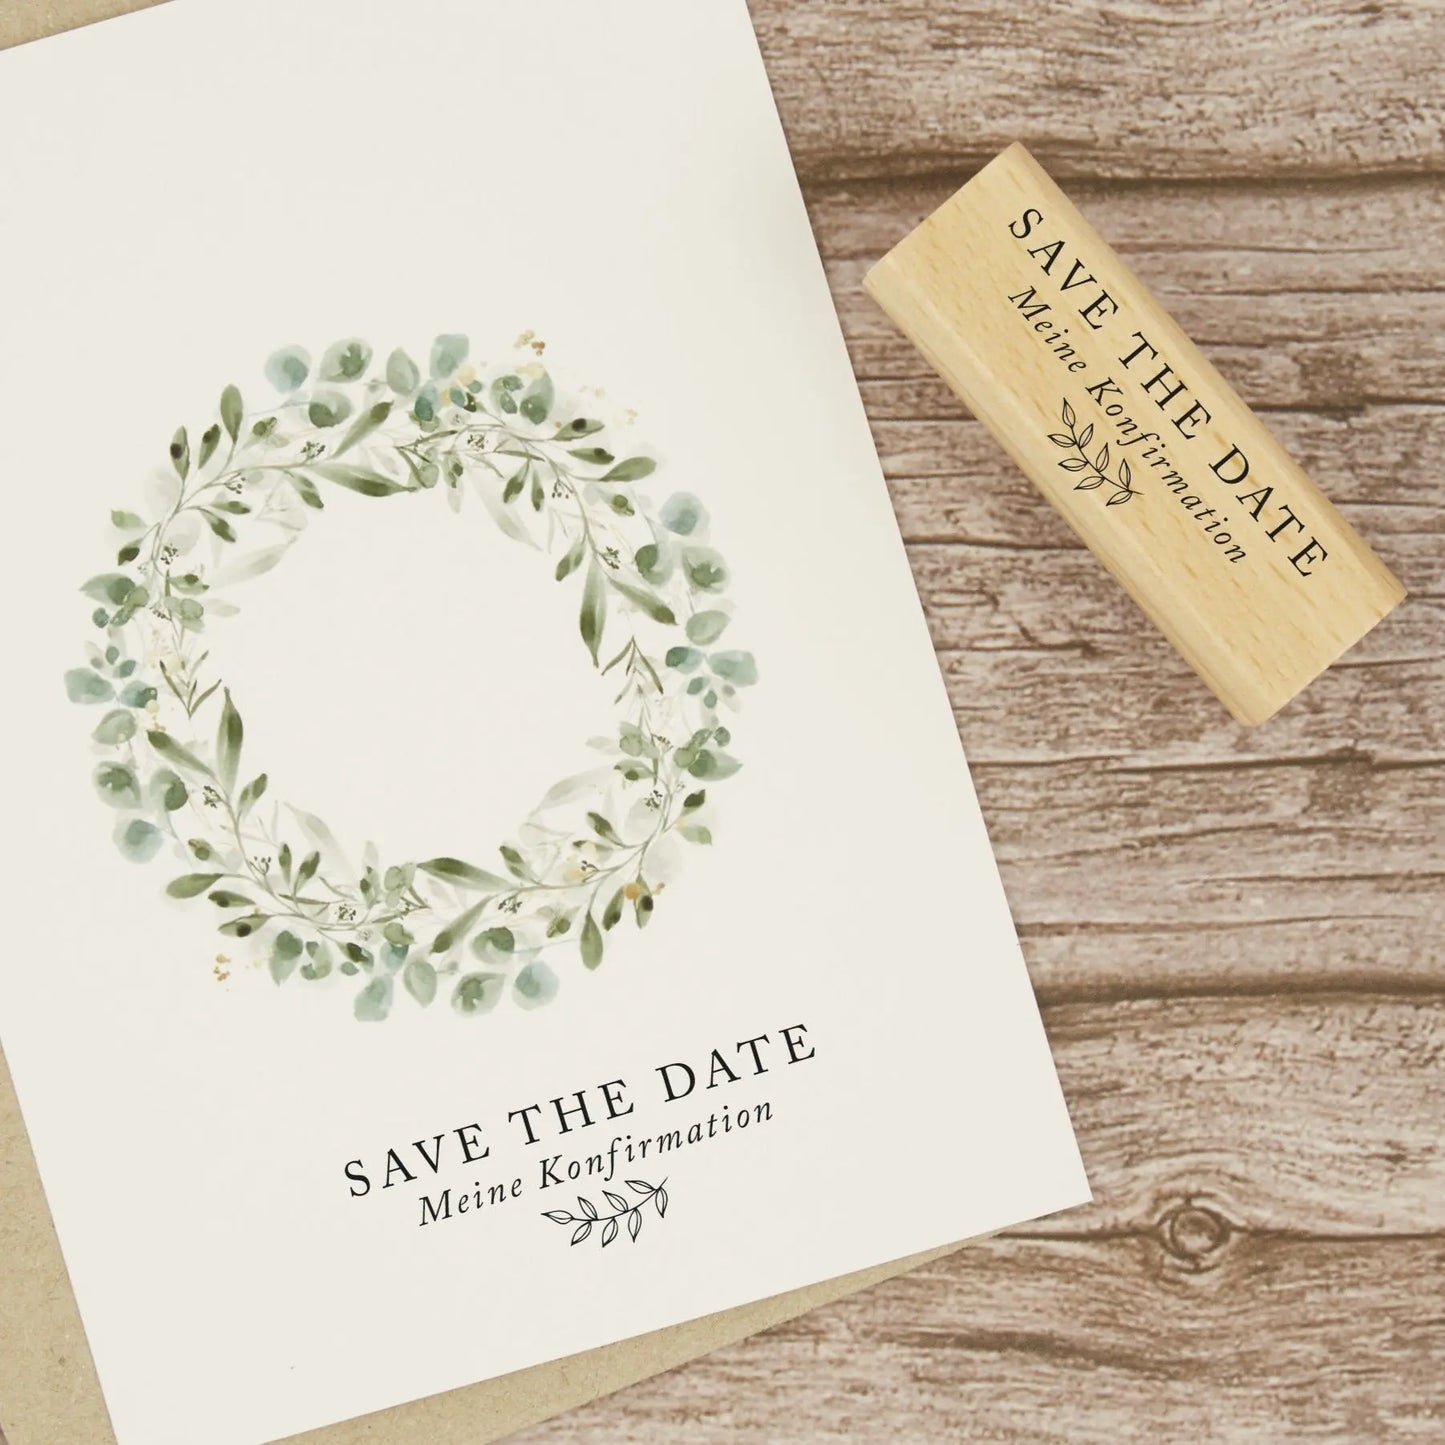 Stempel "Save the date - Meine Konfirmation" - IN LOVE WITH PAPER